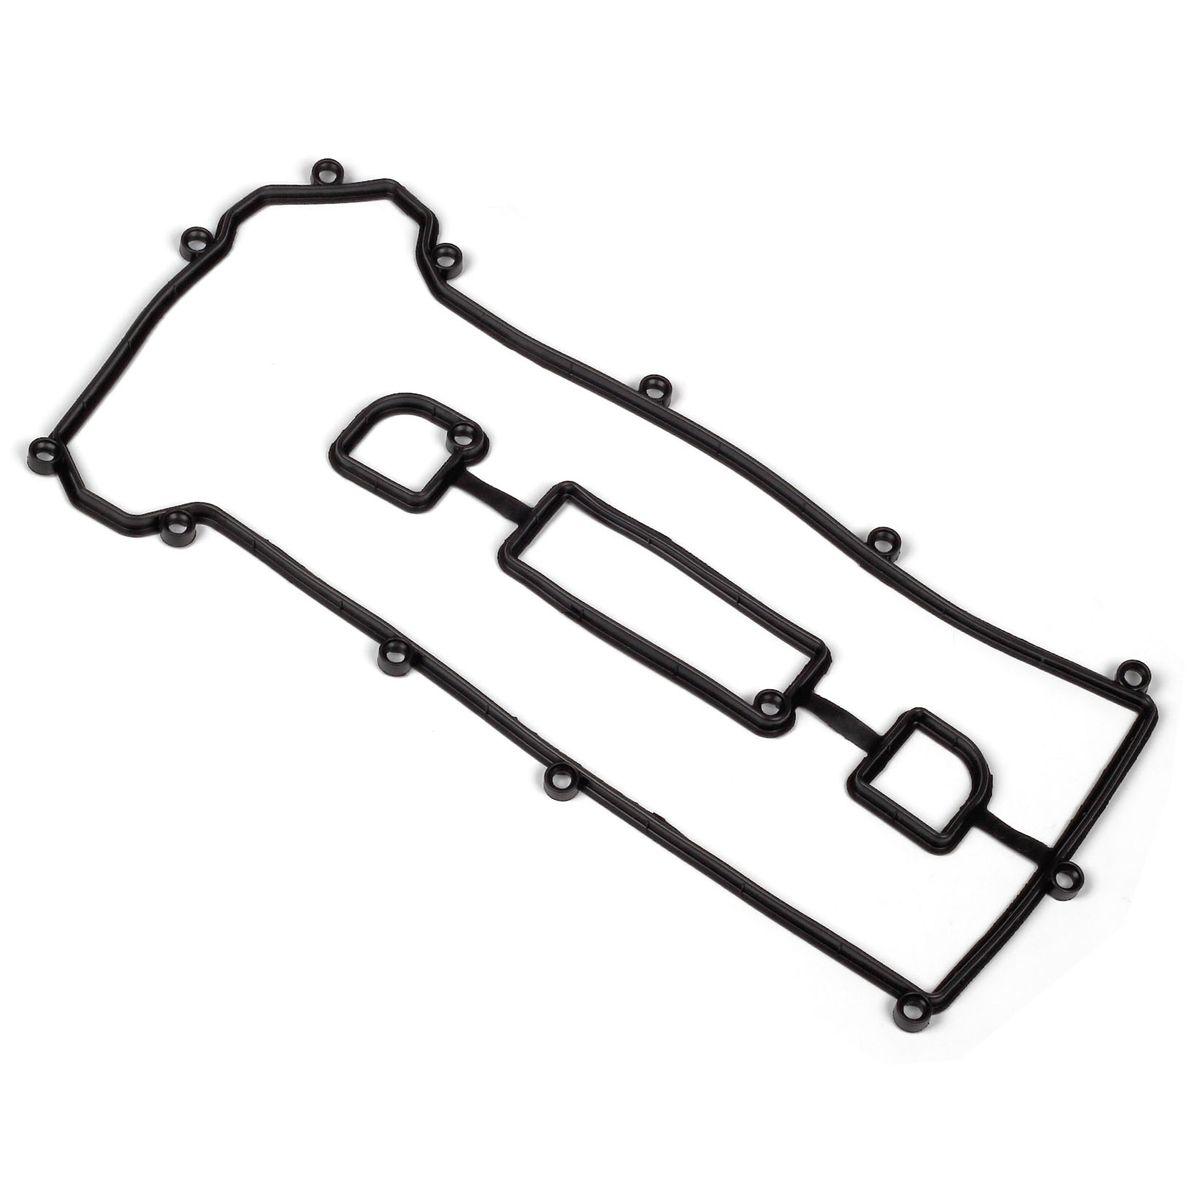 Valve Cover Gasket For 2001-2005 Mazda 6 B2300 Ford Focus2